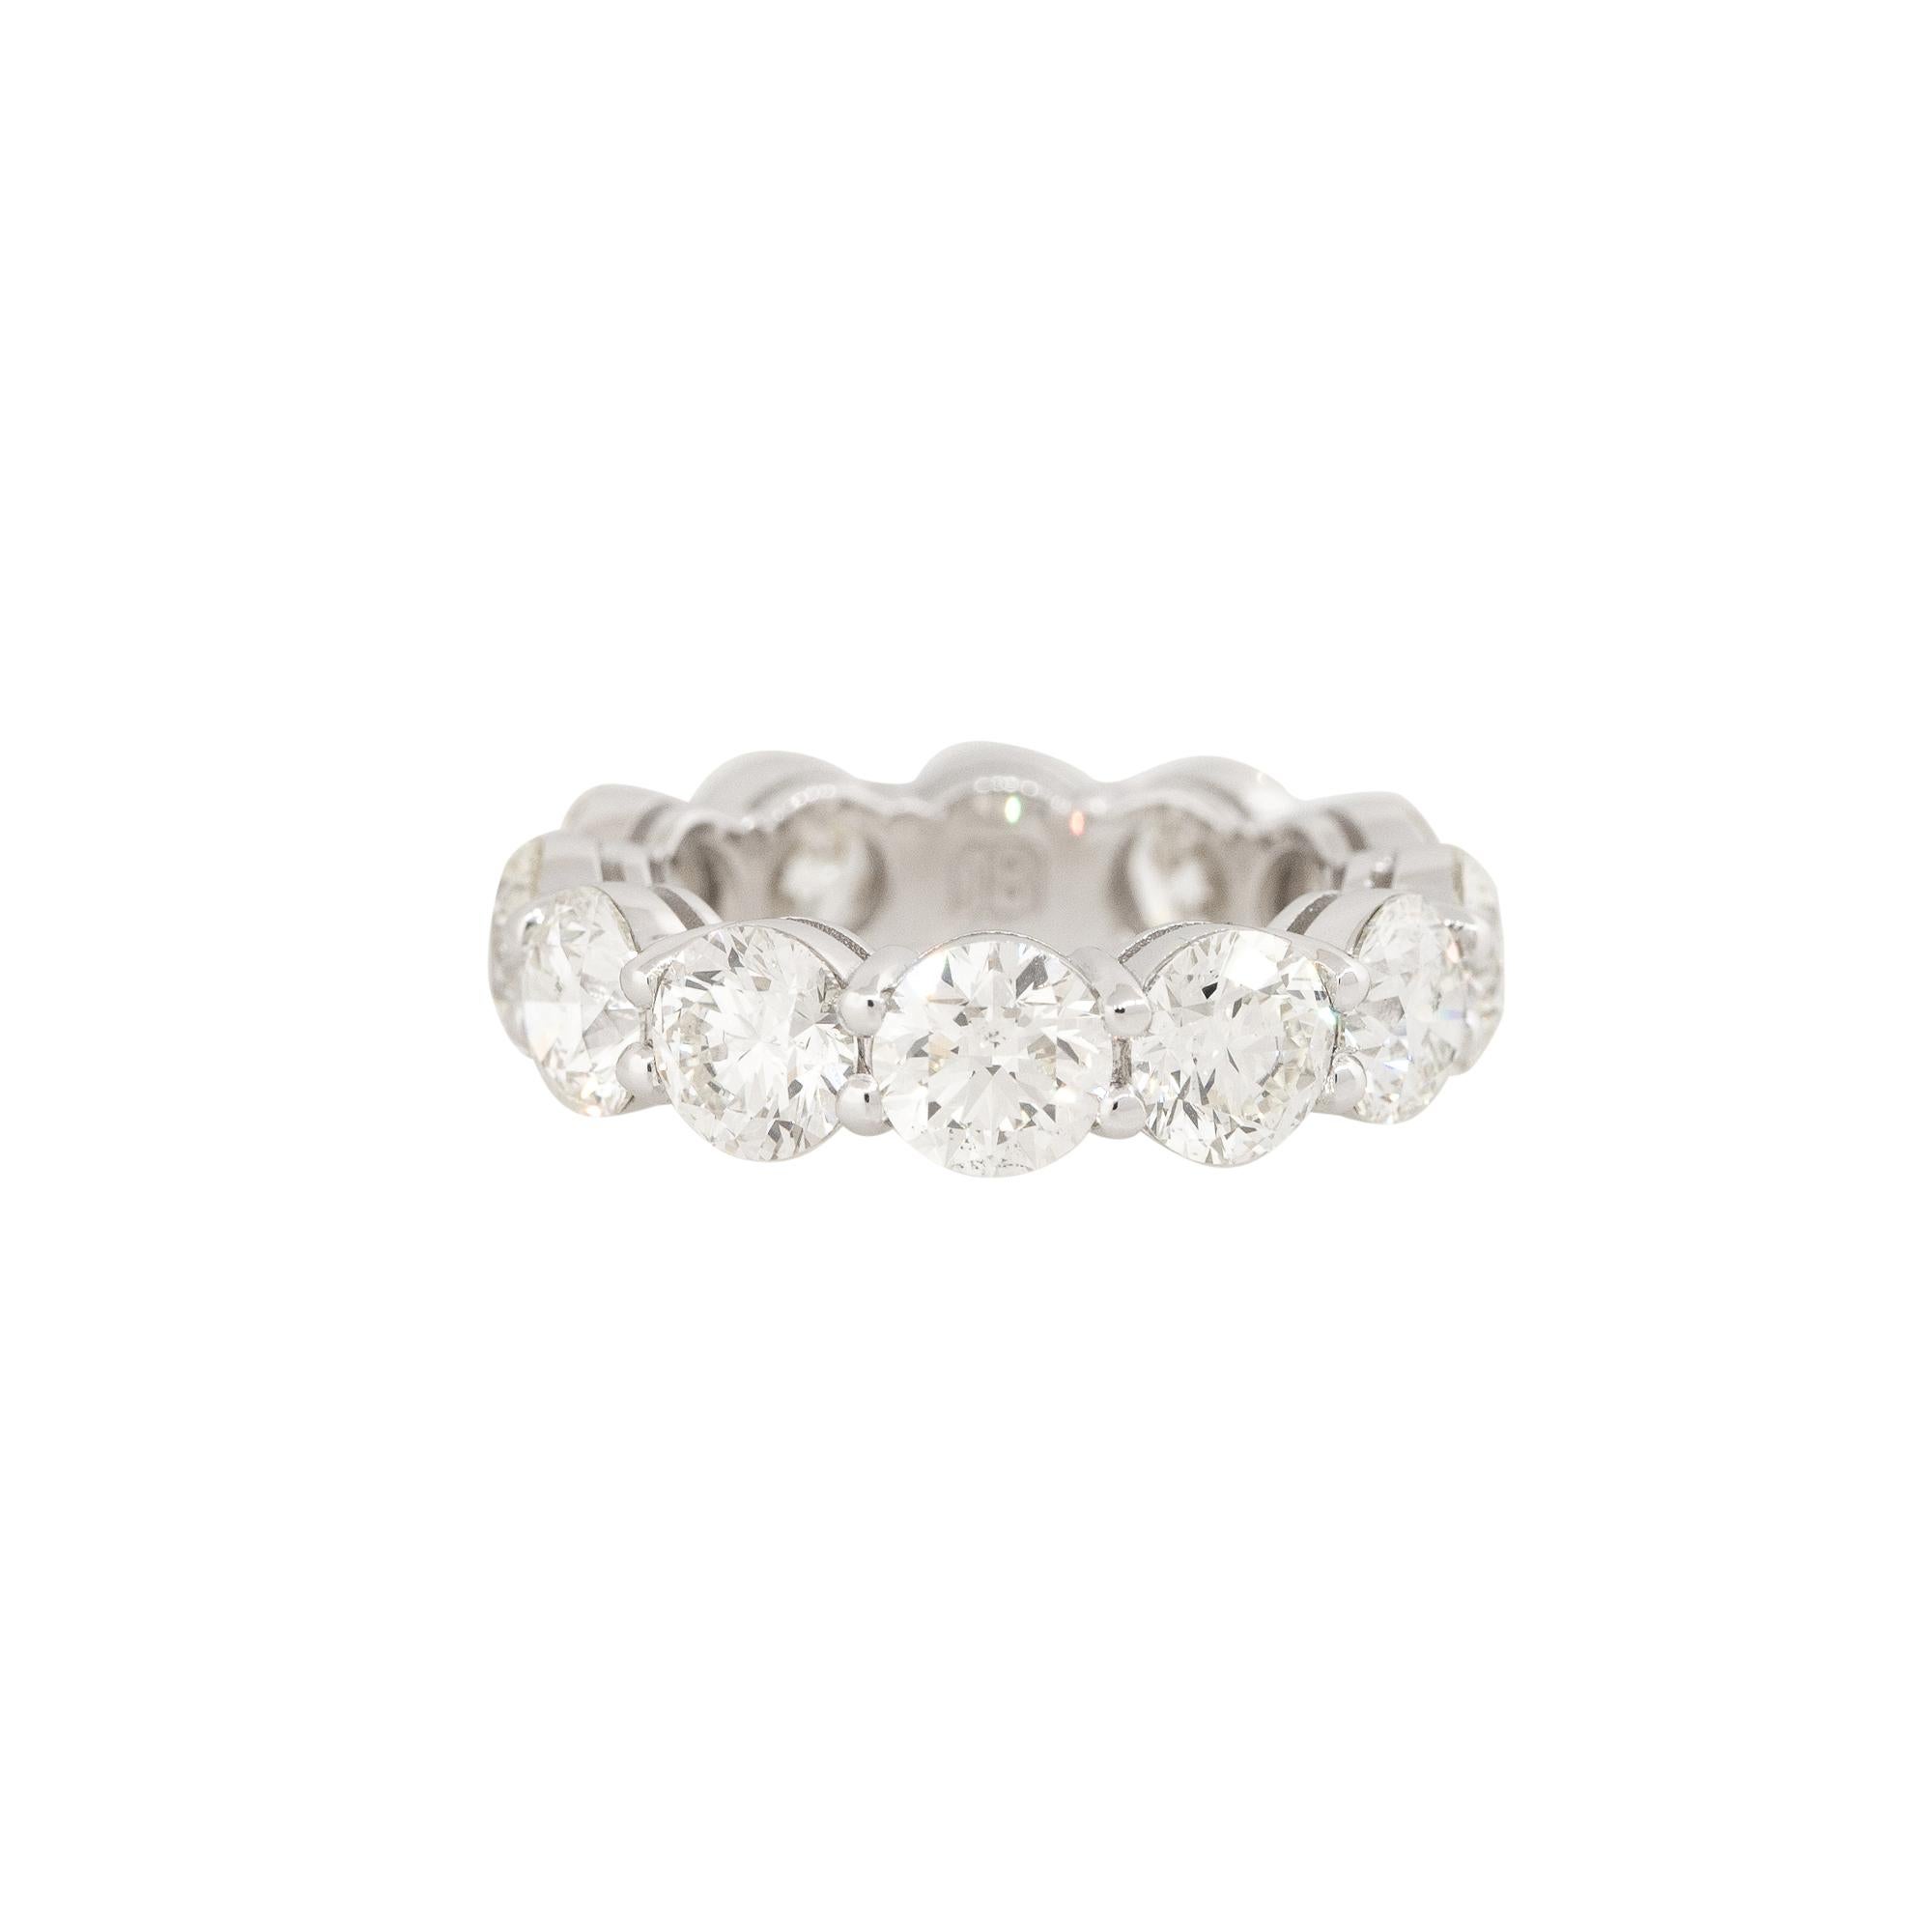 18k White Gold 8.47ctw Round Brilliant Diamond Eternity Band

Style: Women's Diamond Eternity Band
Material: 18k White Gold
Main Diamond Details: There are approximately 8.47 carats of Round Brilliant Cut Diamonds. There are 12 stones total. All